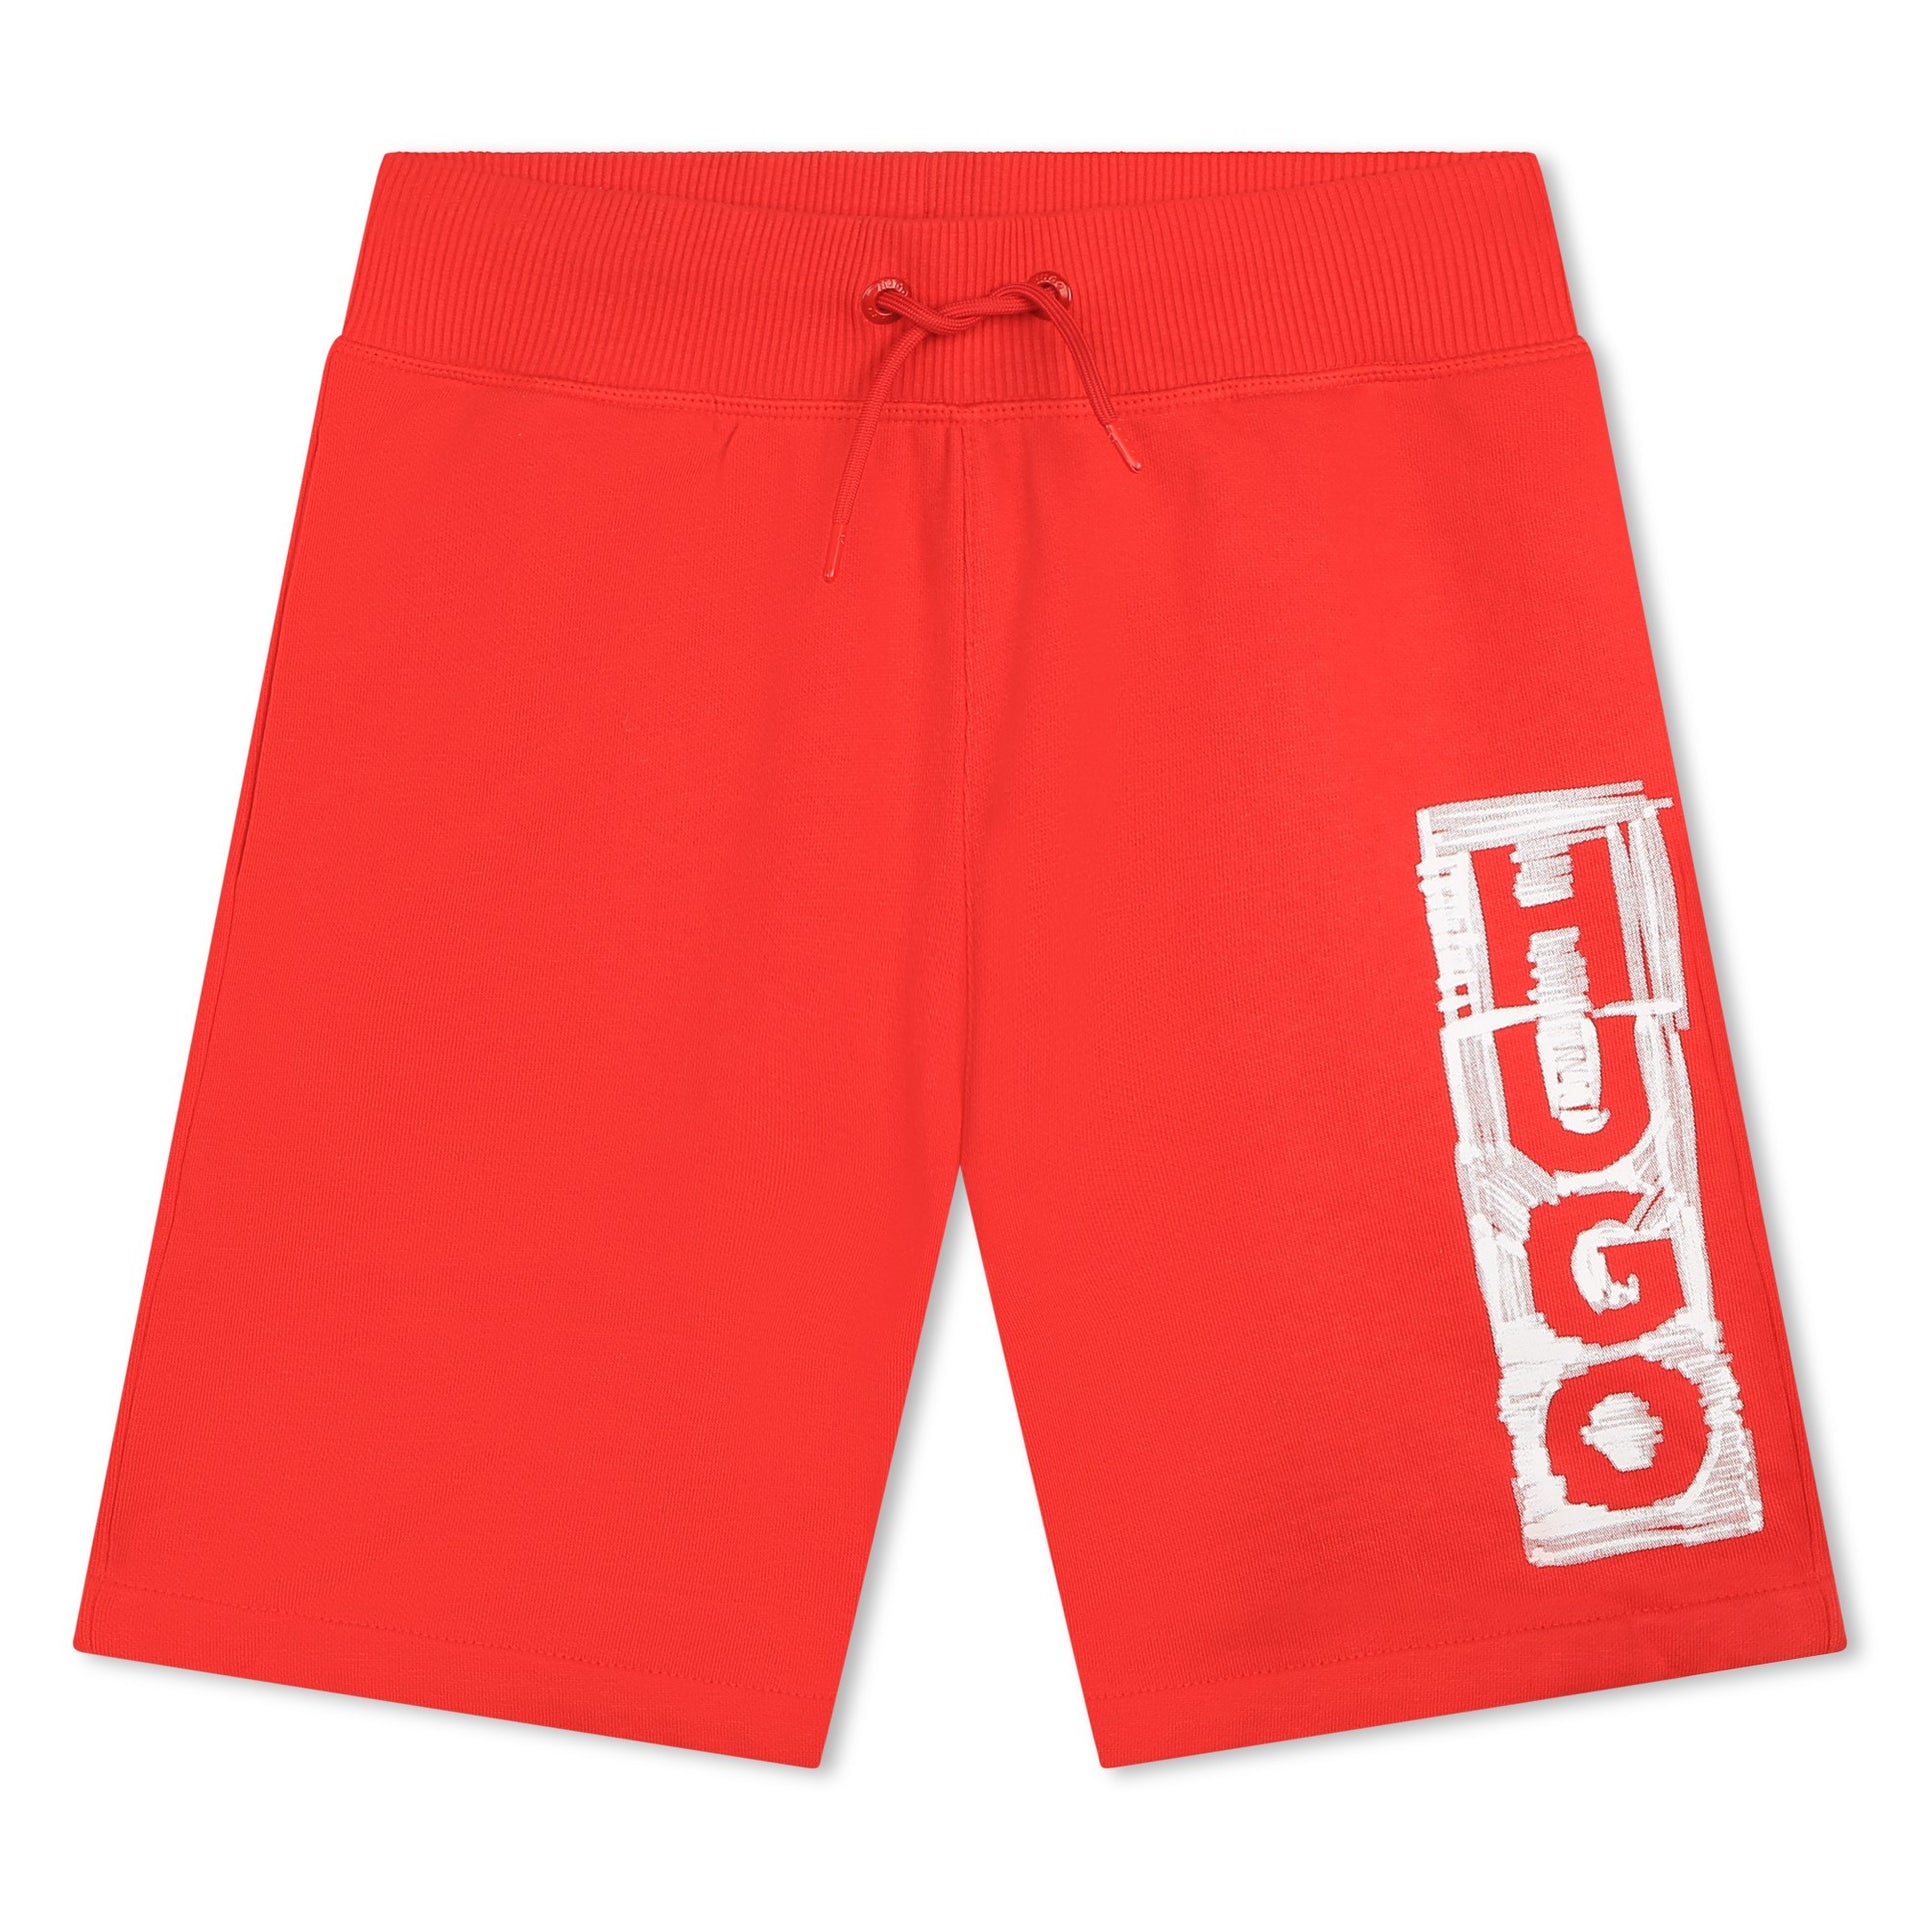 HUGO BOSS Mens DIS212 Red French Terry Jogging Sweat Shorts 50448937 Size  M, XL